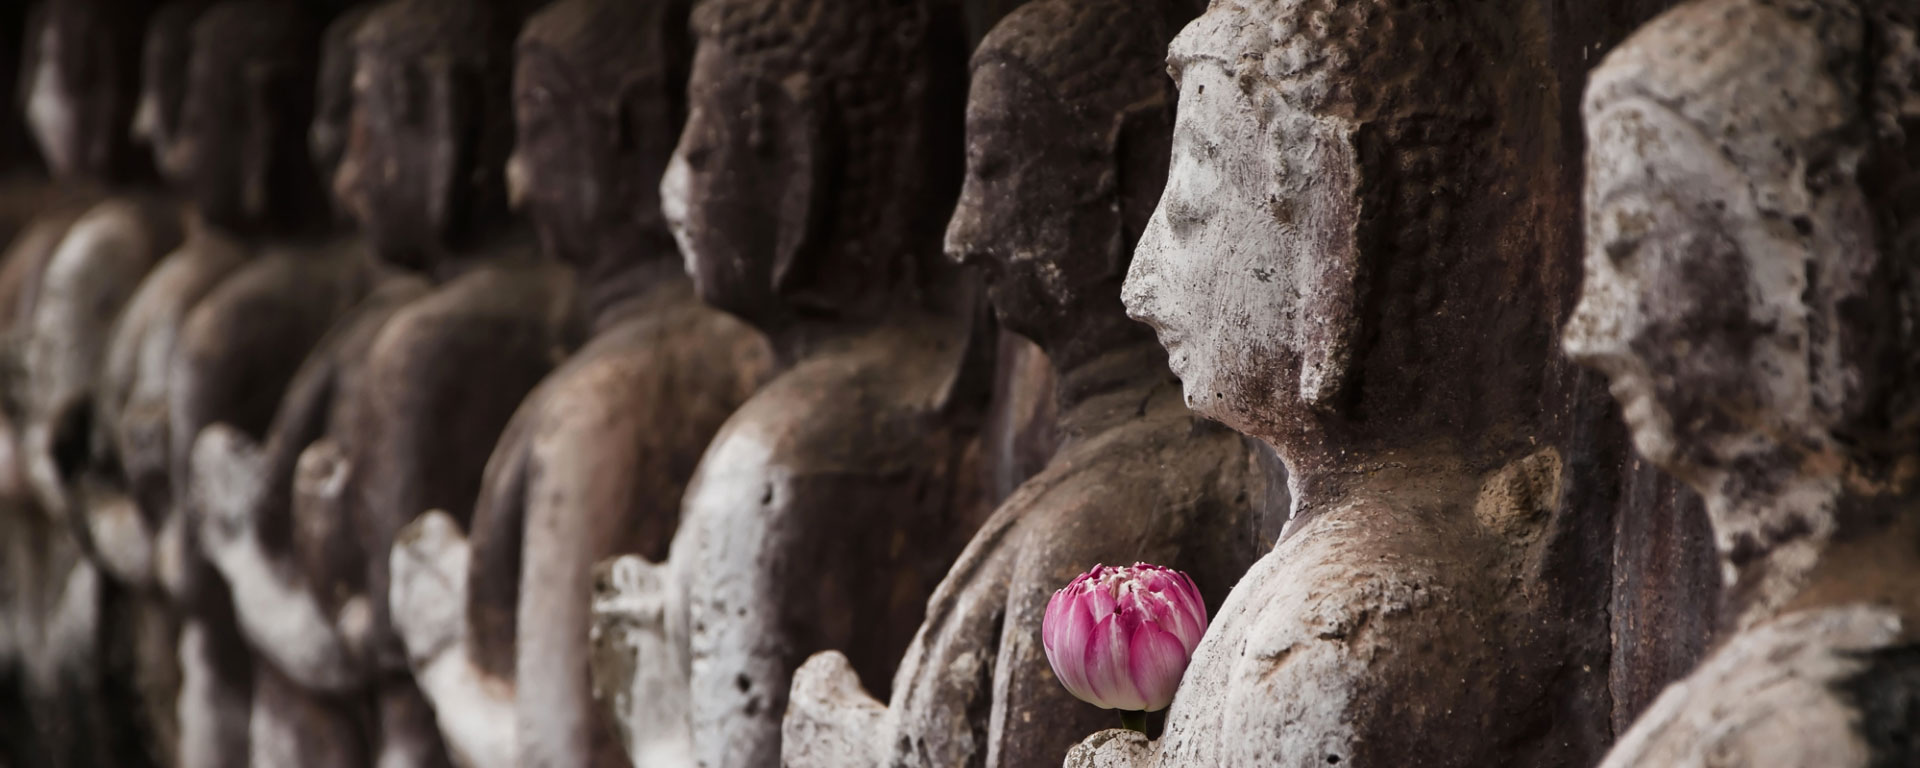 Image of several bouddha statues